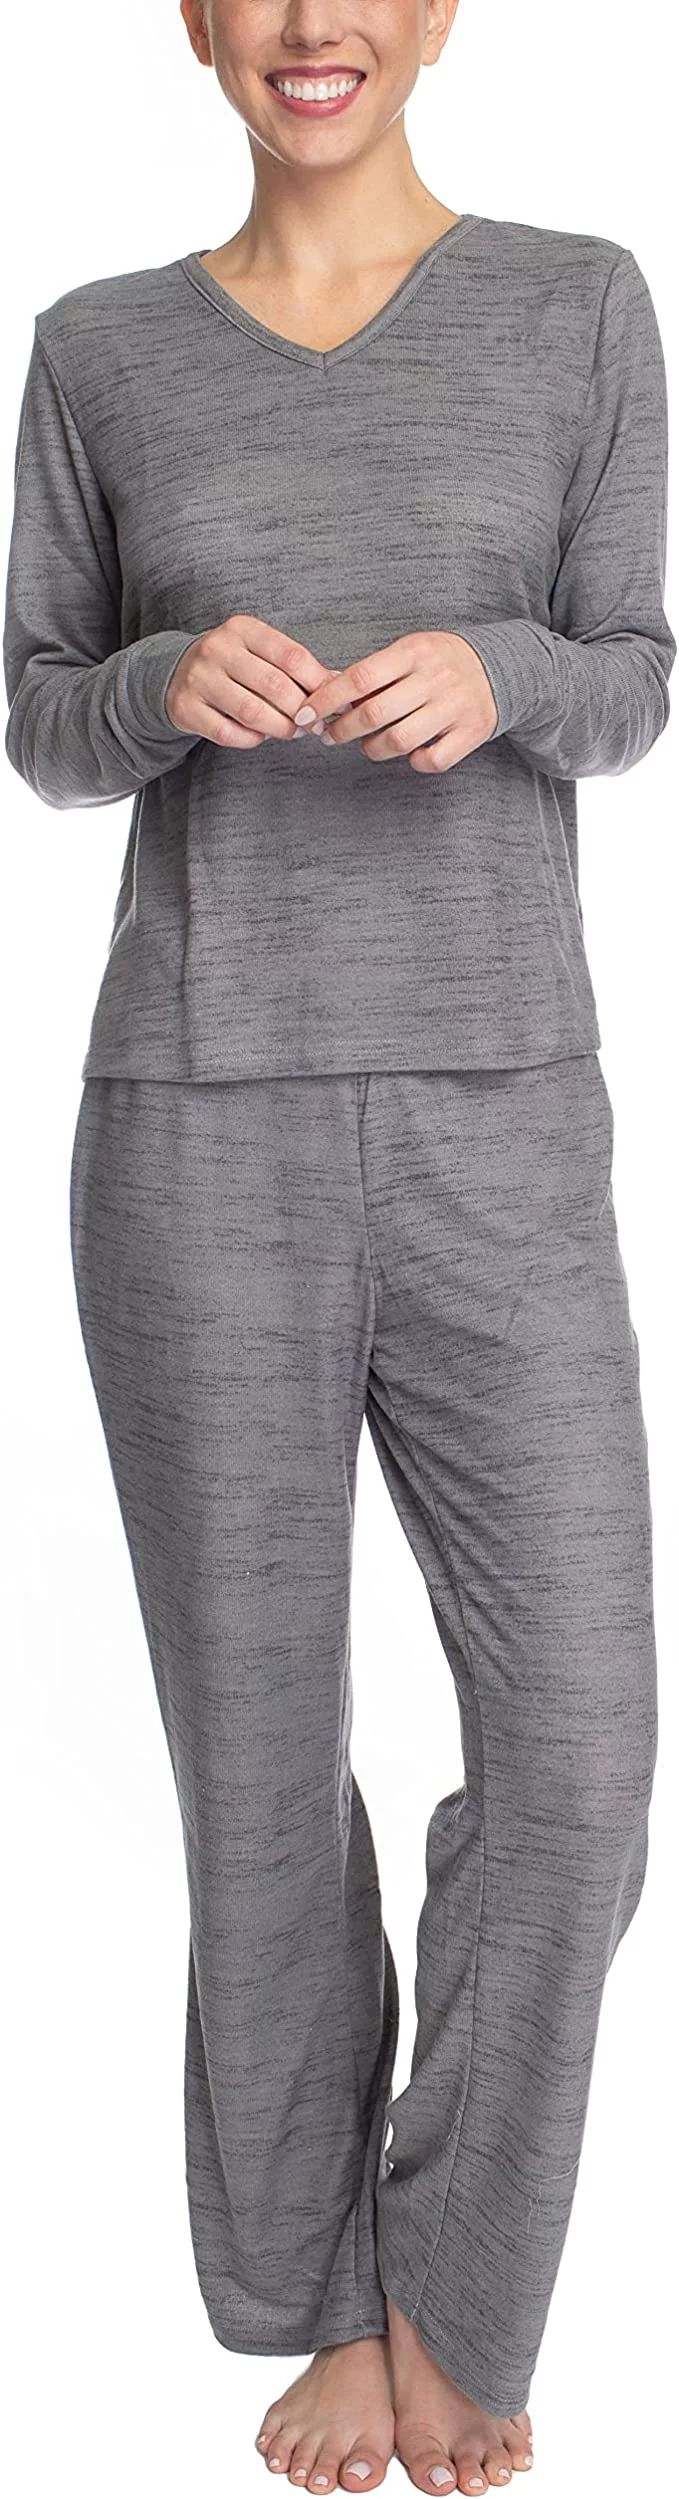 Goodnight Kiss Women's Max and Relax Butter Knit Lounge Wear Pajama Set, Gray, Large | Walmart (US)